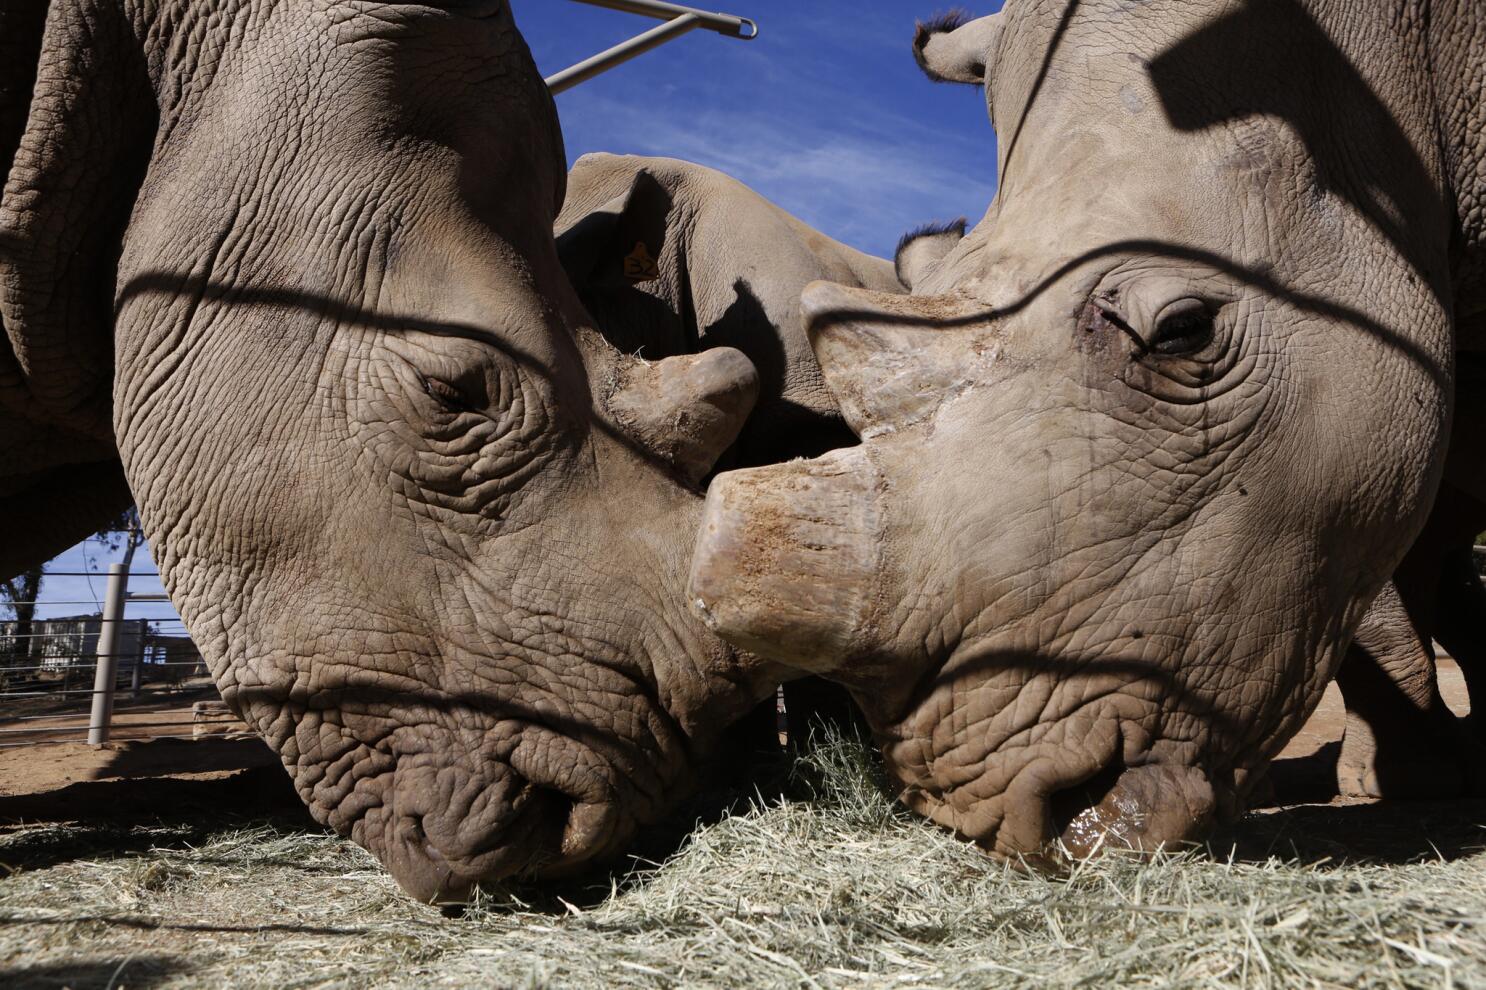 Officials hope six new rhinos at Safari Park become scientific